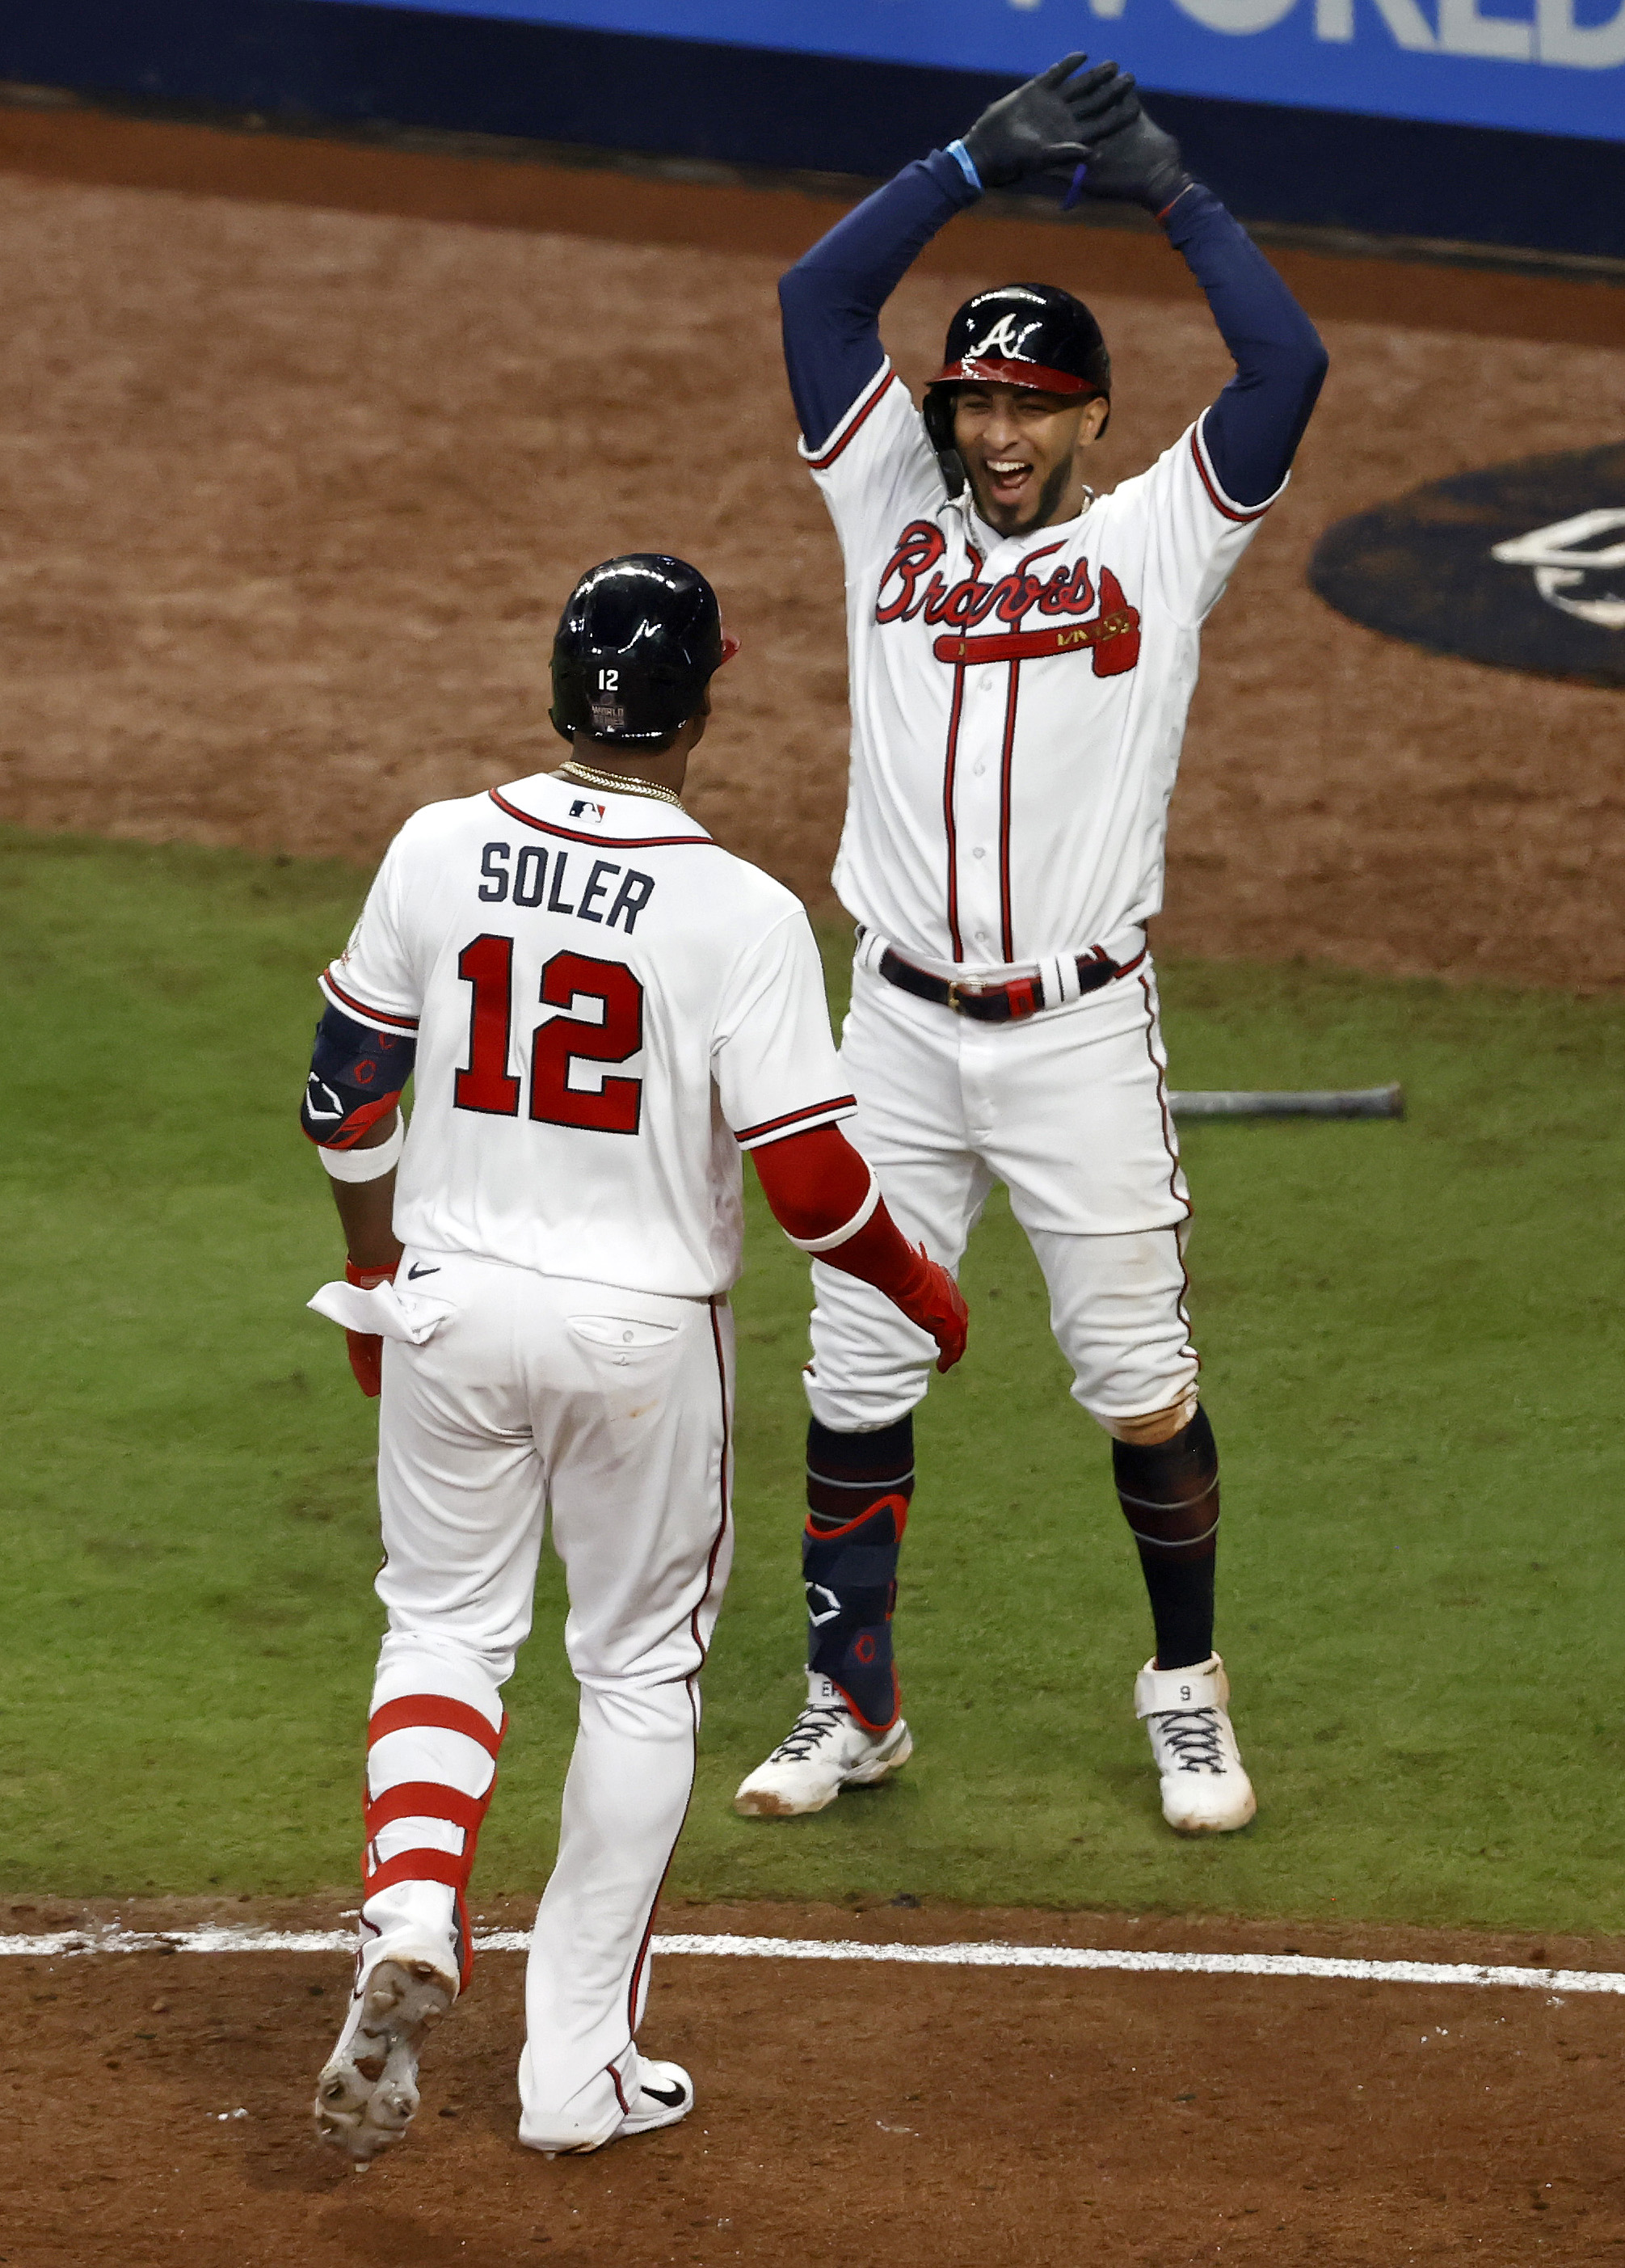 Jorge Soler #12 of the Atlanta Braves is congratulated by Eddie Rosario #8 after hitting a solo home run against the Houston Astros during the seventh inning in Game Four of the World Series at Truist Park on October 30, 2021 in Atlanta, Georgia.